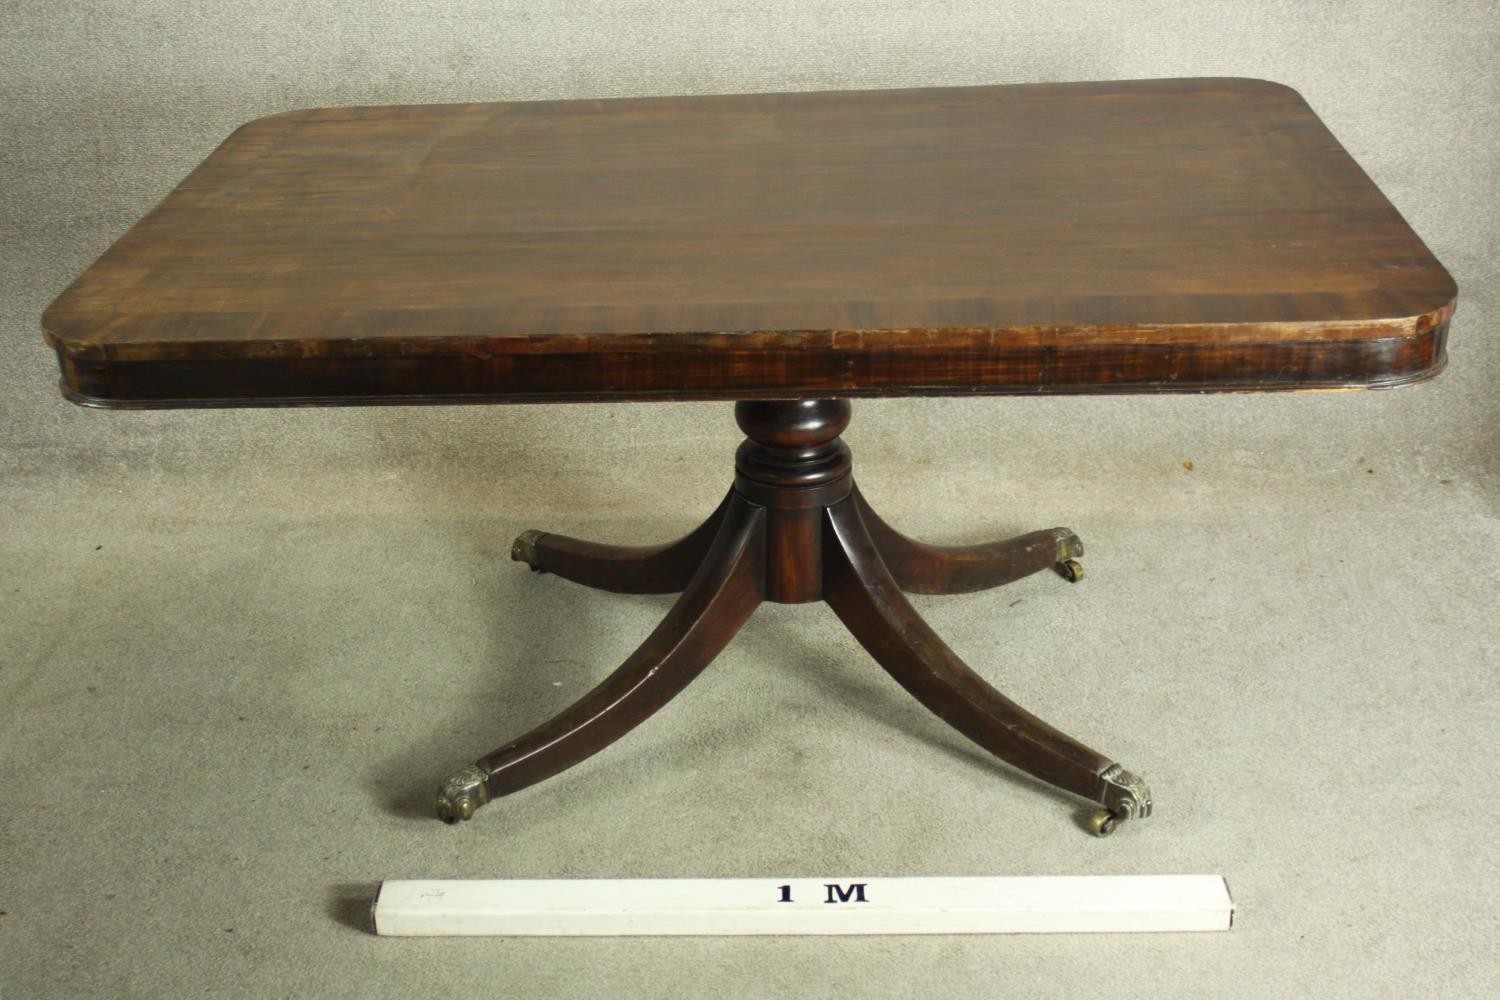 A 19th century mahogany square topped table with rounded corners. H.71 W.152 D.95cm. - Image 2 of 3